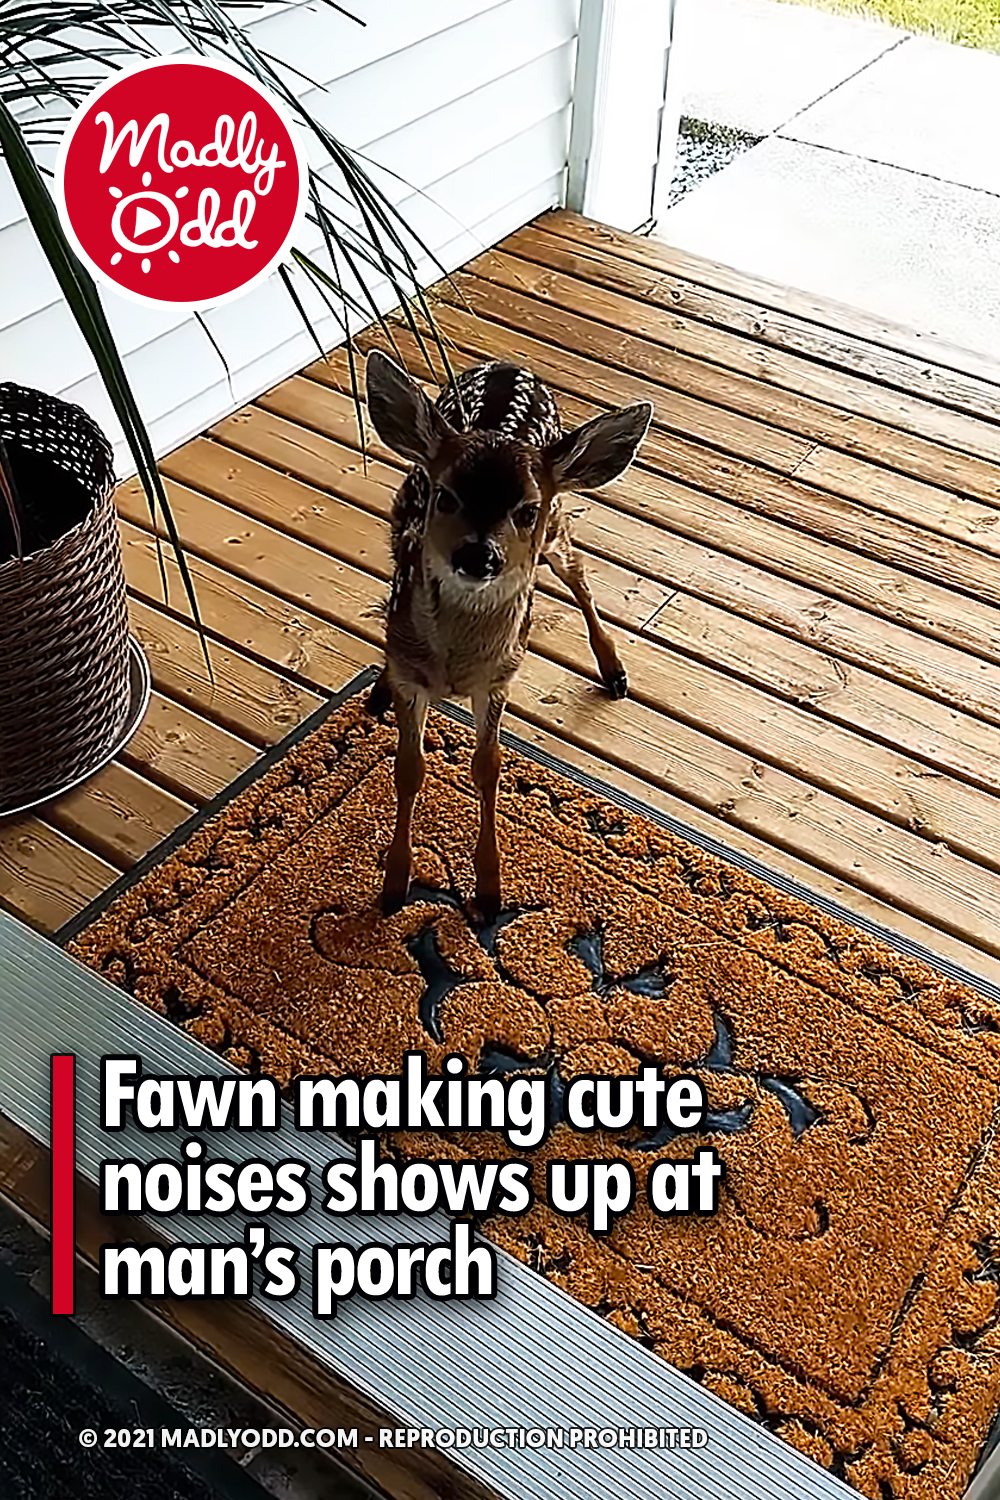 Fawn making cute noises shows up at man’s porch